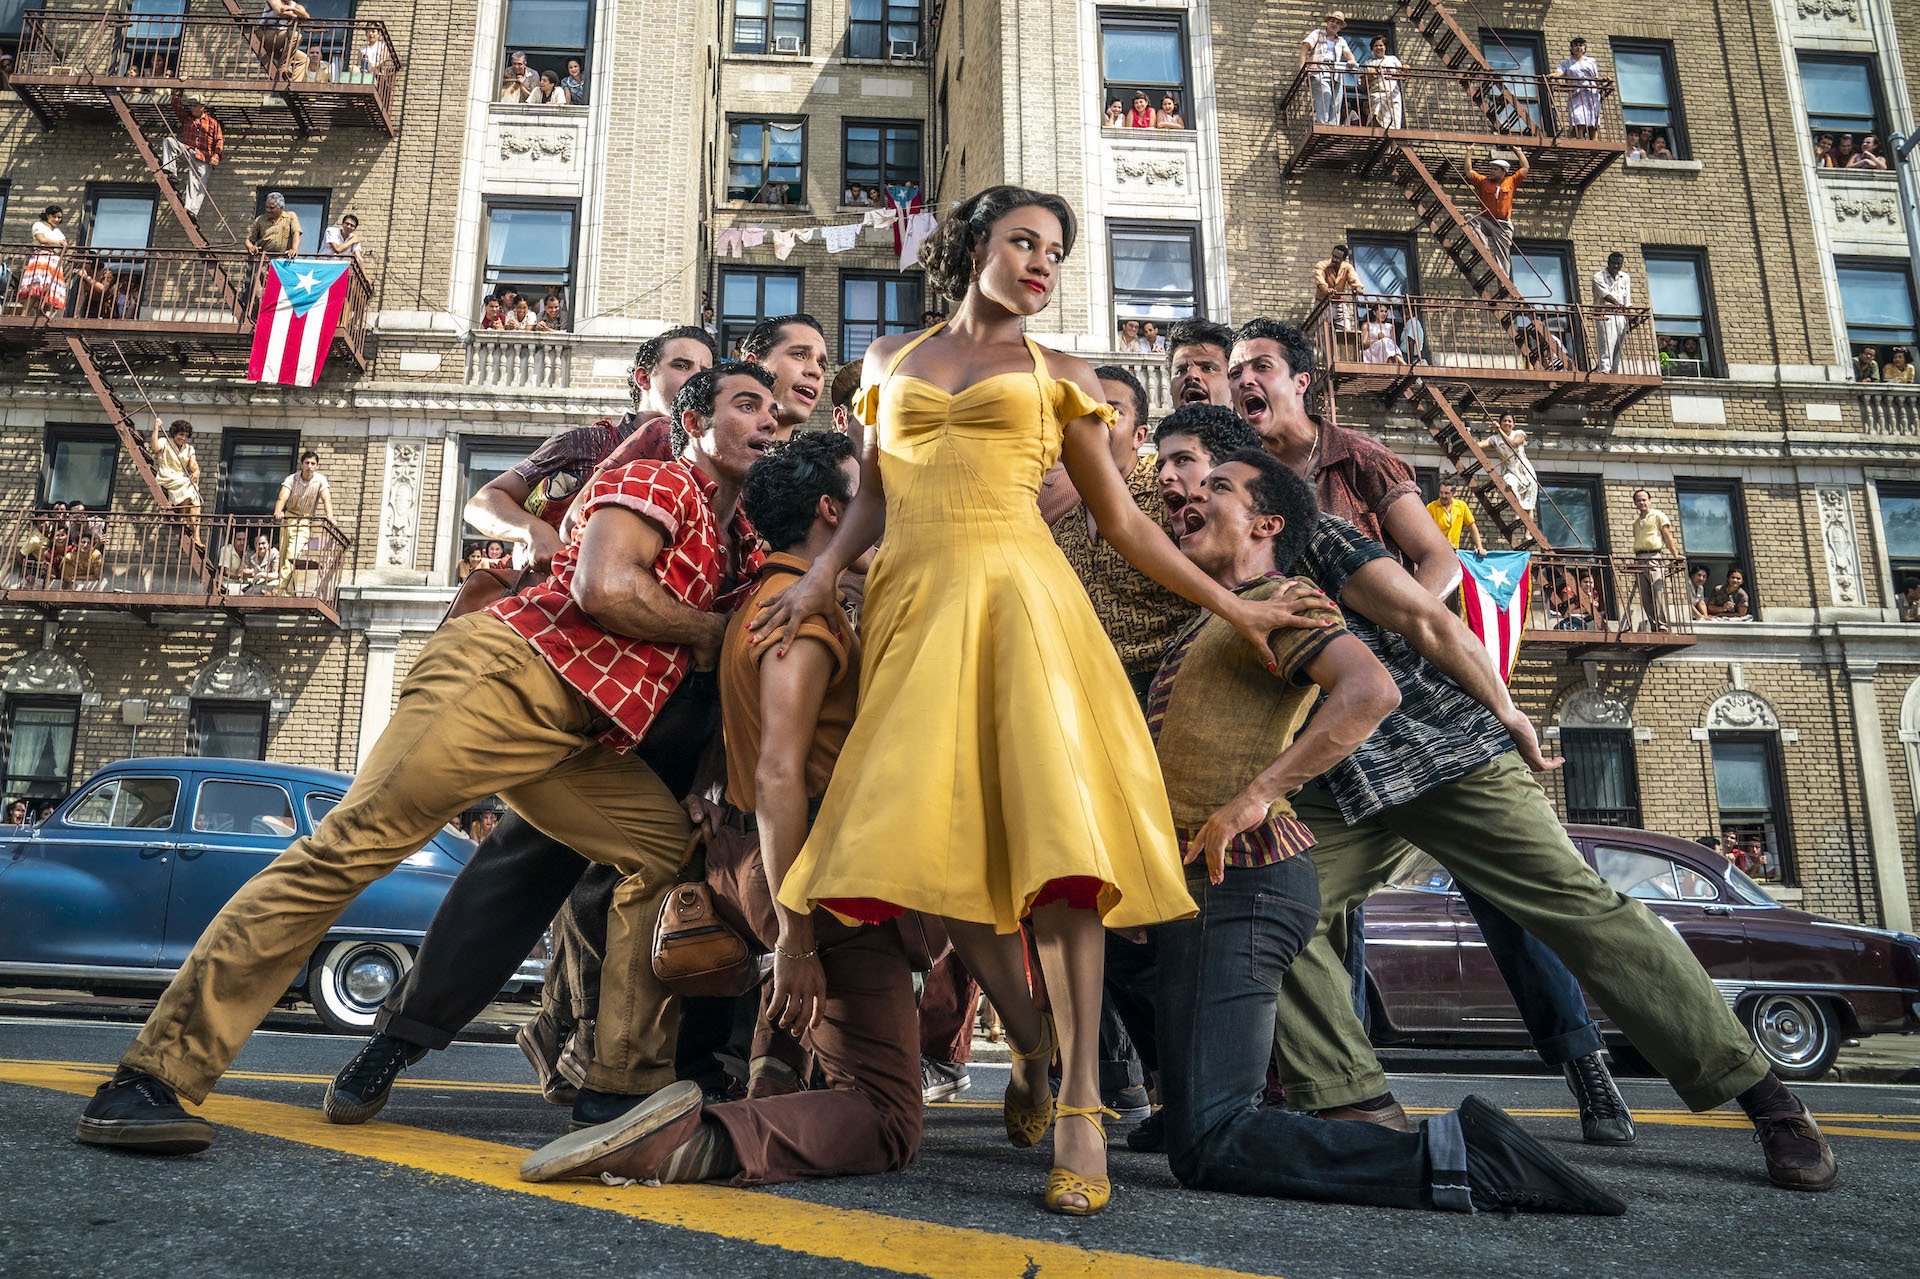 Ariana Debose as Anita in "West Side Story," wearing a yellow dress and surrounded by ensemble members.